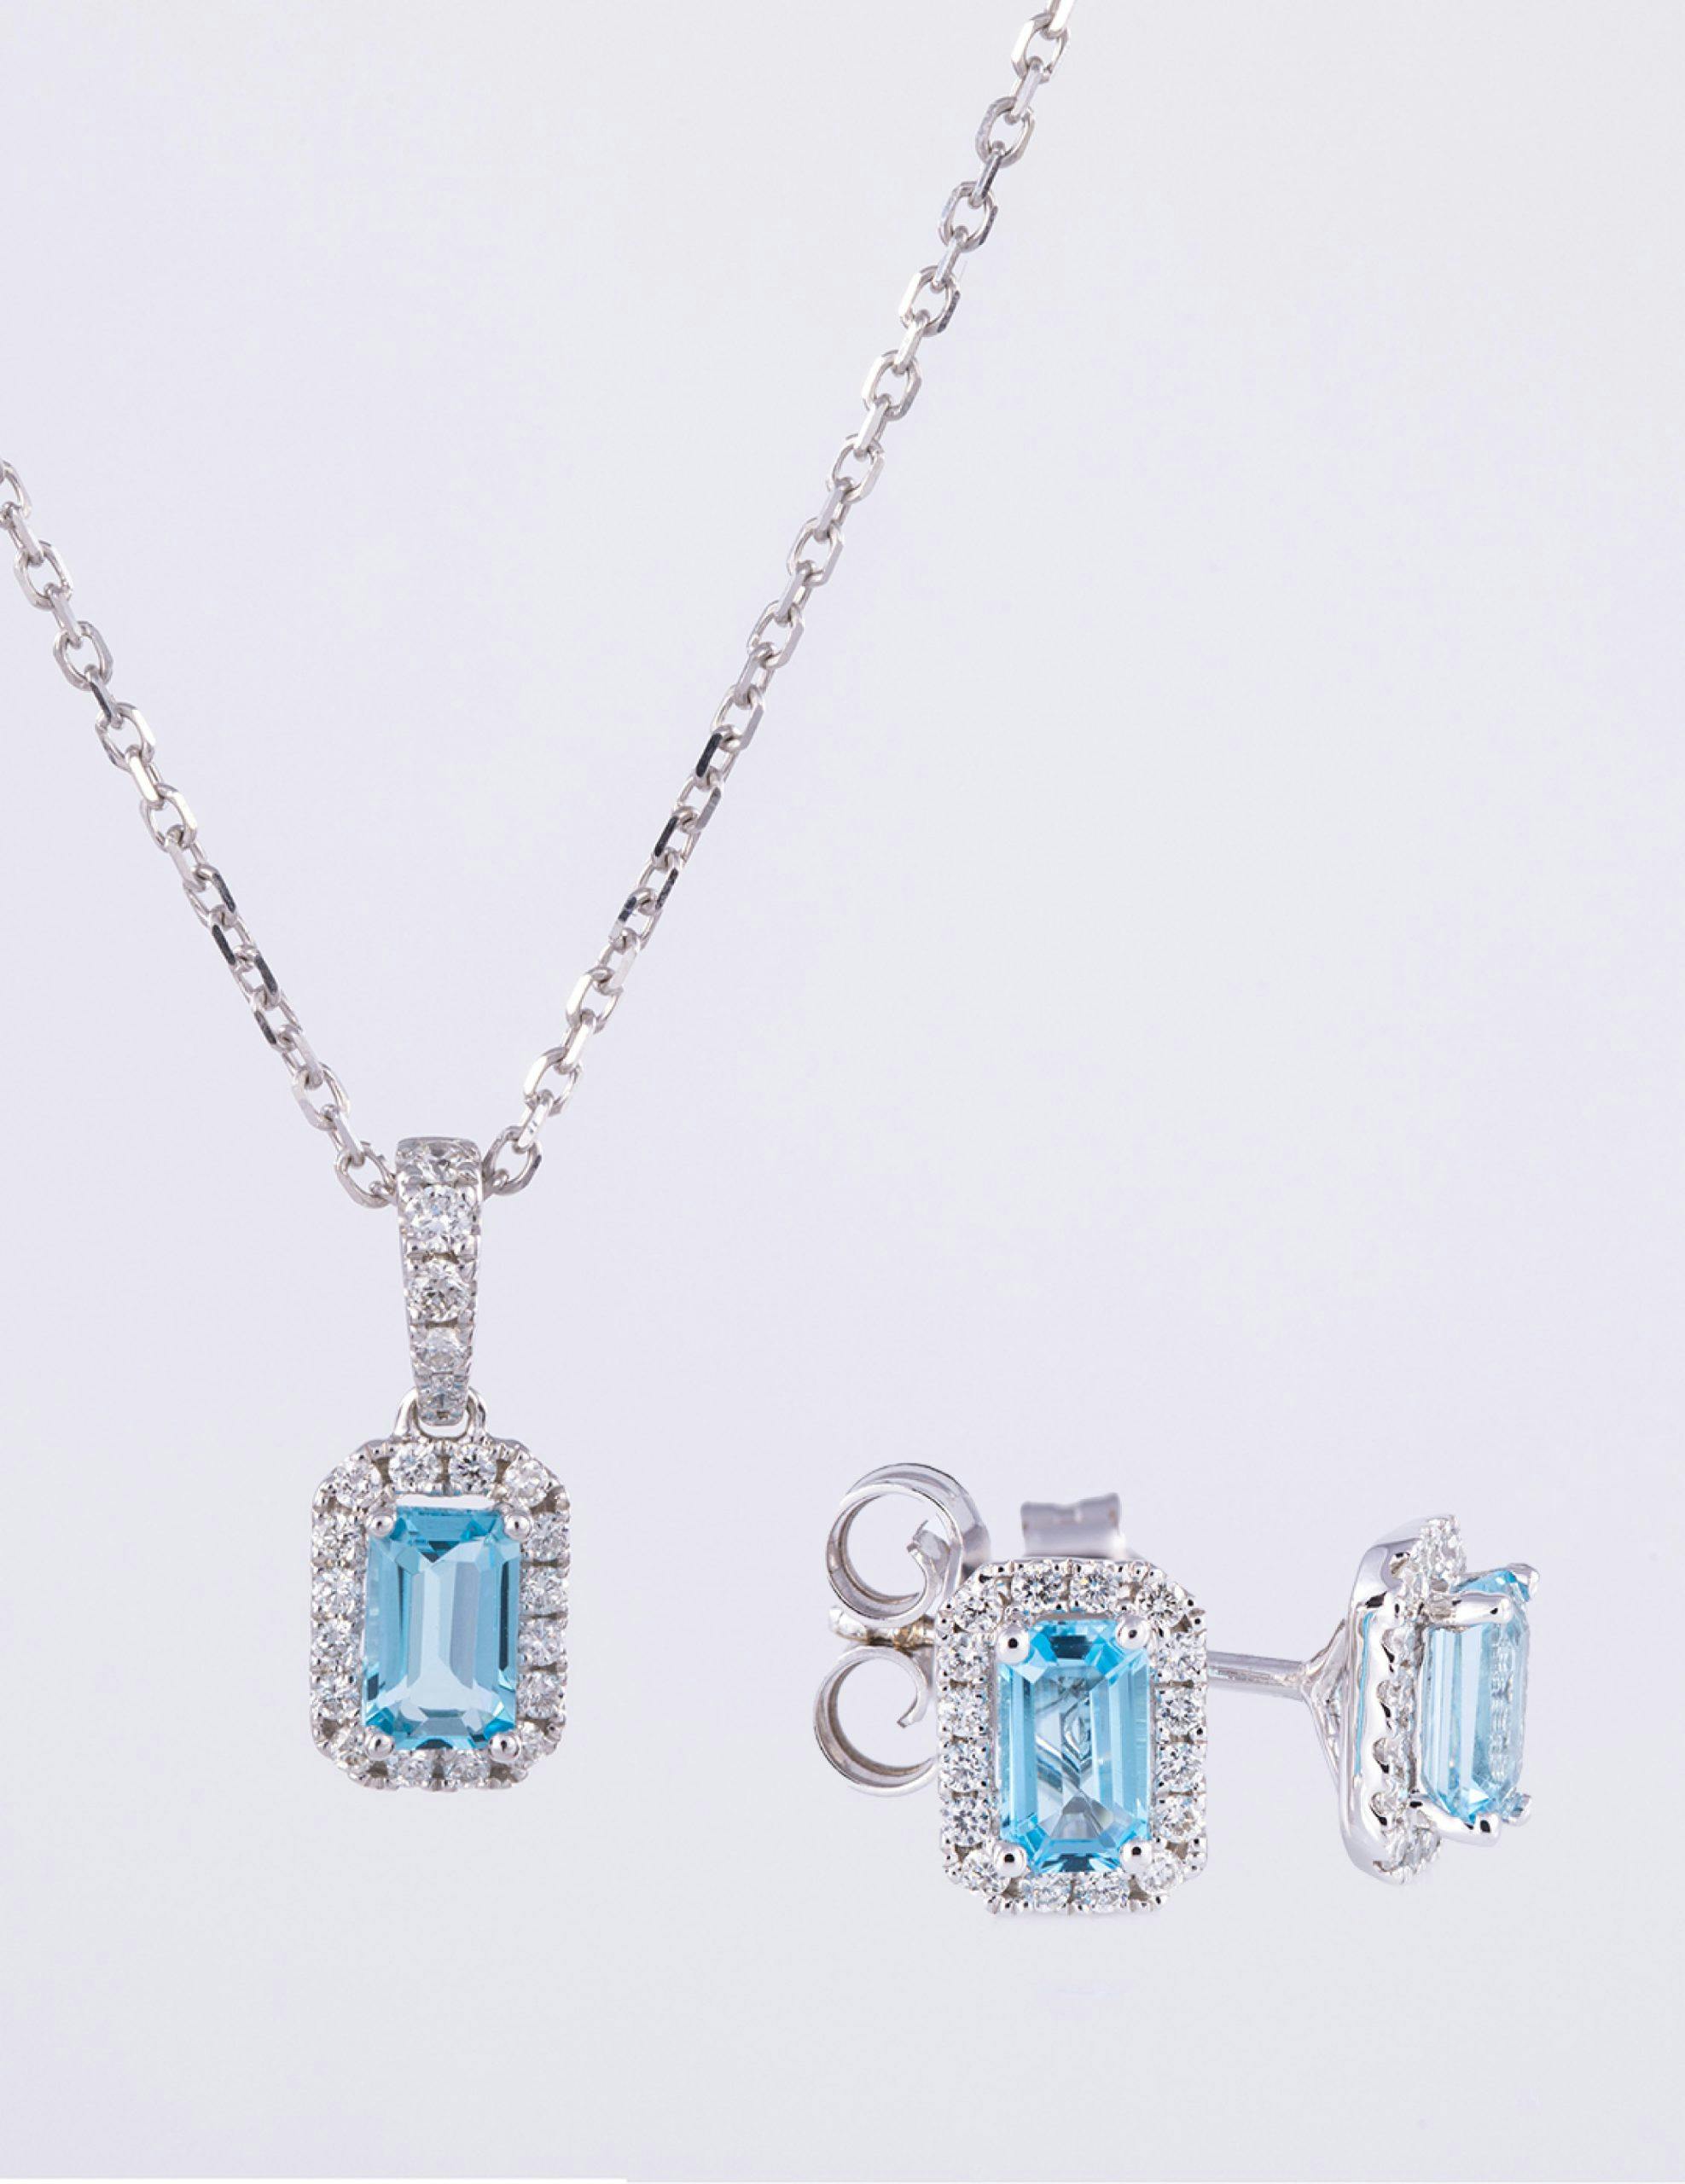 Swiss Blue Topaz and Diamond Necklace and Earrings